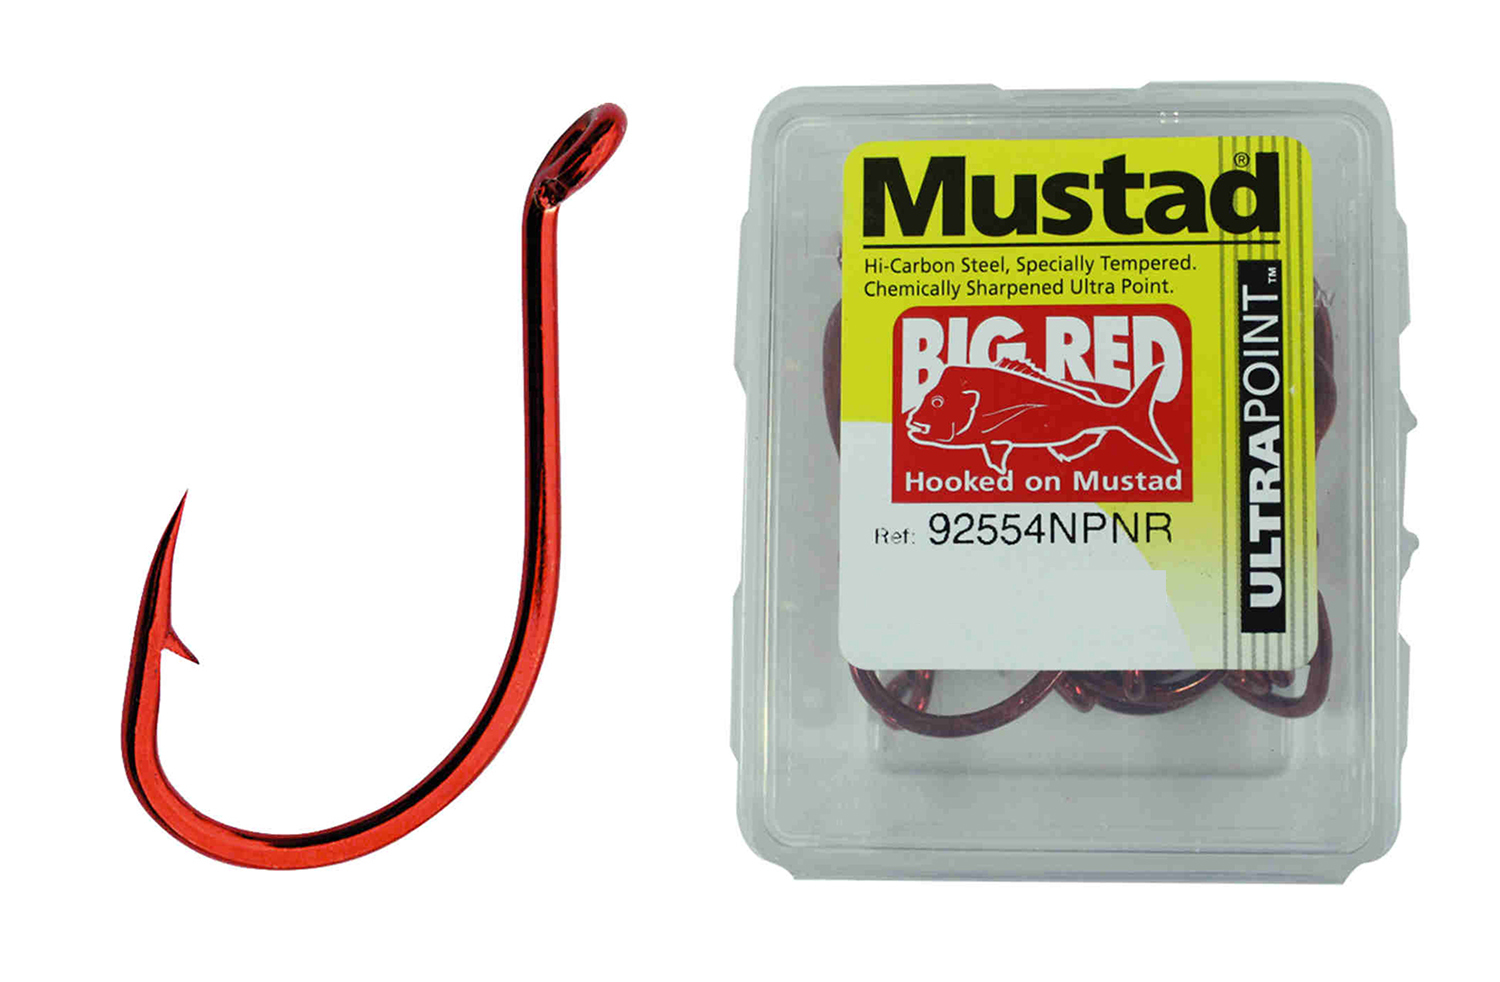 Mustad 92554npnr - Size 5/0 Qty 25 - Big Red X-Strong Chemically Sharpened